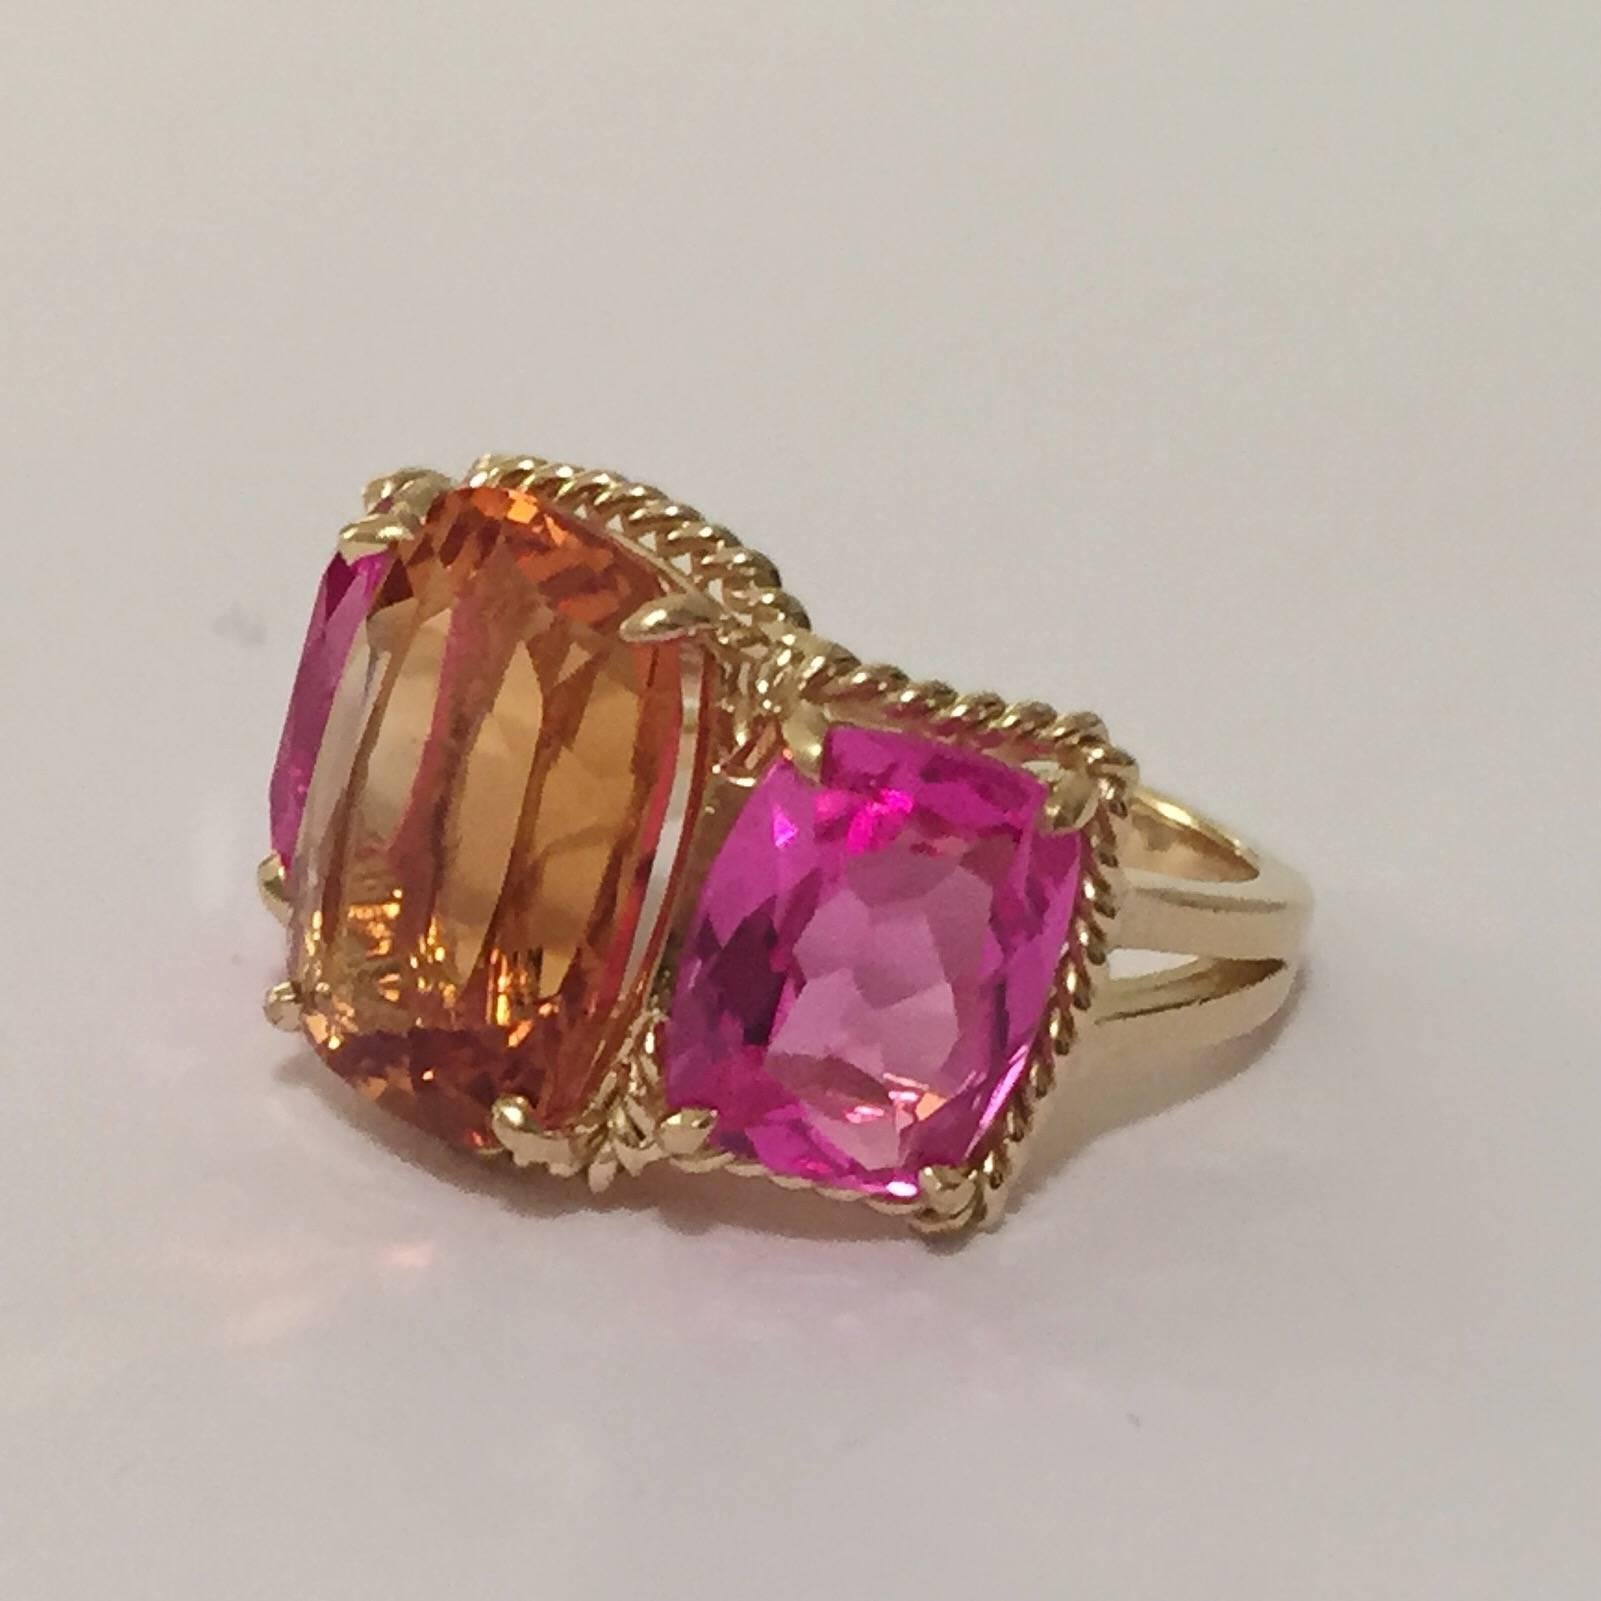 Elegant 18kt Yellow Gold Three Stone Ring with Citrine, Pink Topaz and Rope Twist Border with split shank detail. The ring features three faceted cushion cut stones surrounded by twisted gold rope. The center Citrine stone measures 5/8